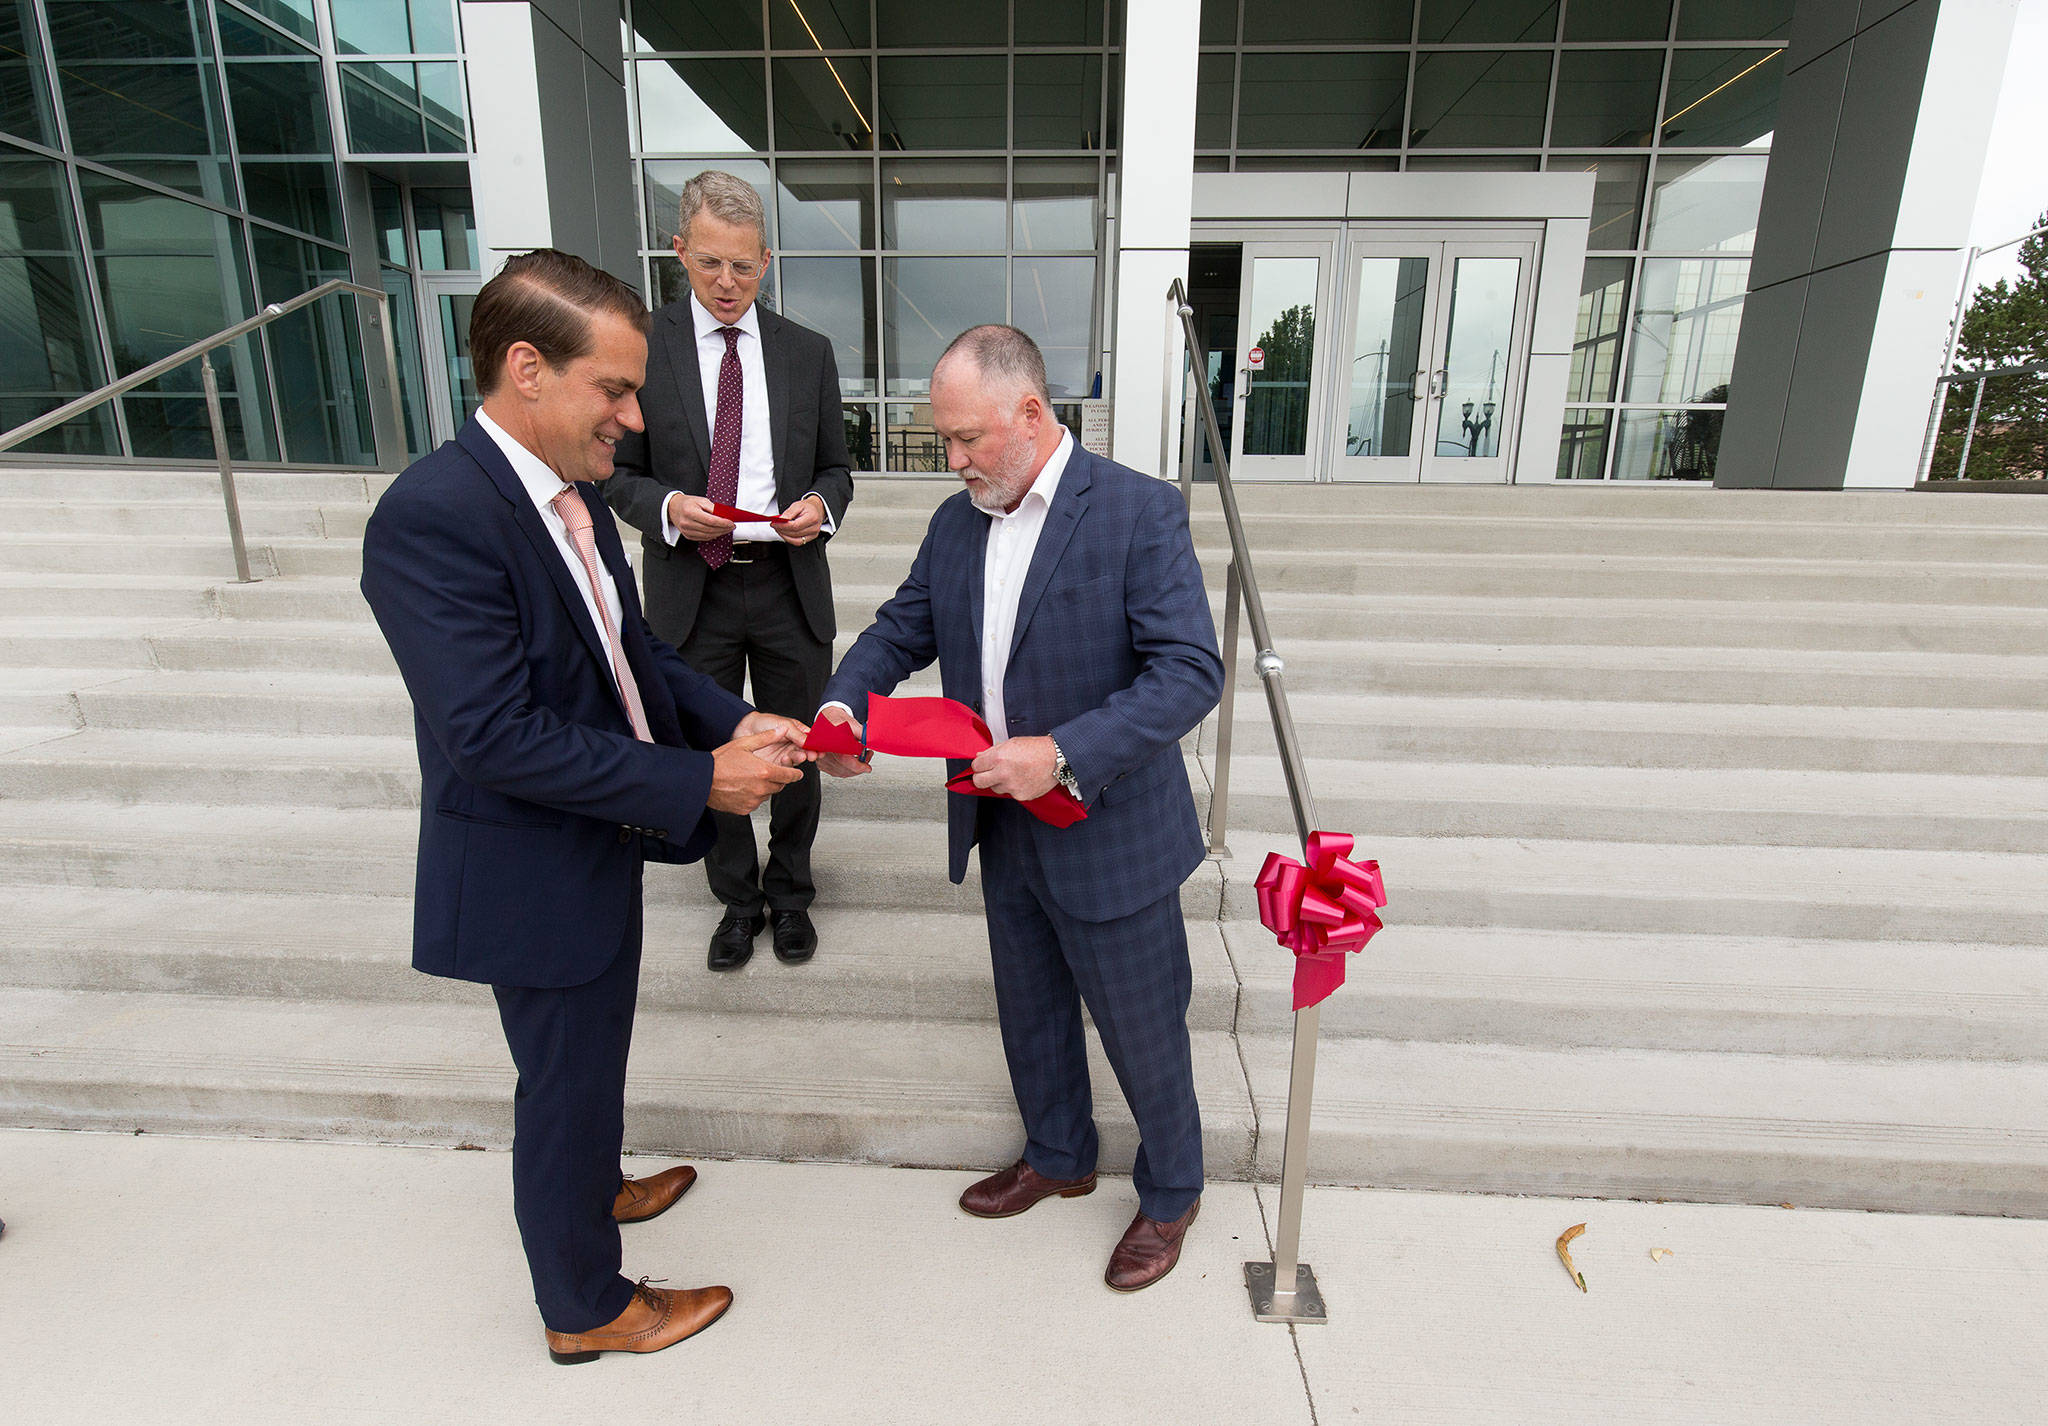 After cutting a section for Snohomish County Superior Court Judge George Appel, Joshua Dugan cuts off a piece of ribbon for Snohomish County Prosecuting Attorney Adam Cornell after the ceremony to mark the completion of the Snohomish County Courthouse remodel and addition project Thursday in Everett. (Andy Bronson / The Herald)